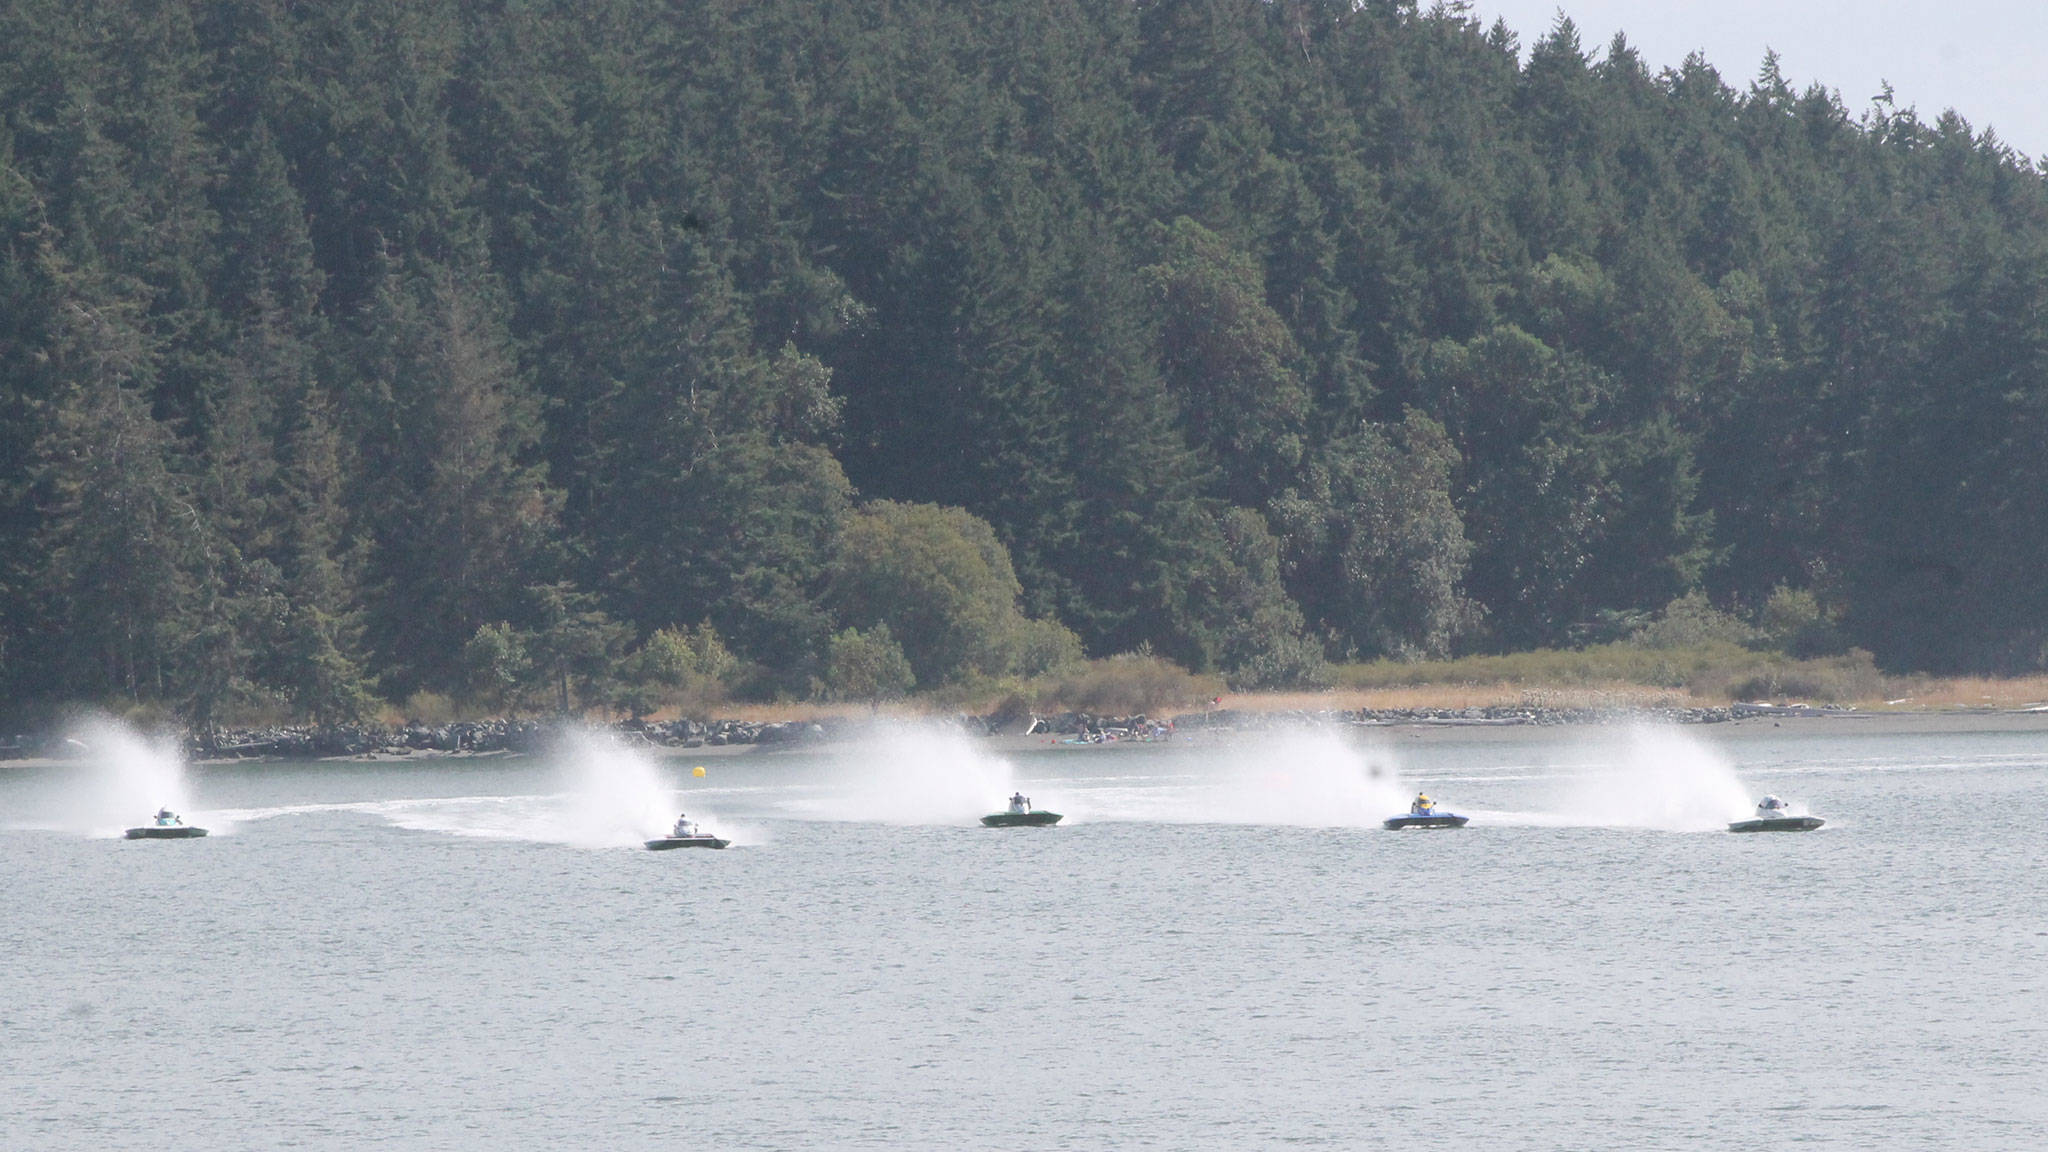 Boats shoot across the starting line in last year’s race. (Photo by Jim Waller/Whidbey News-Times)